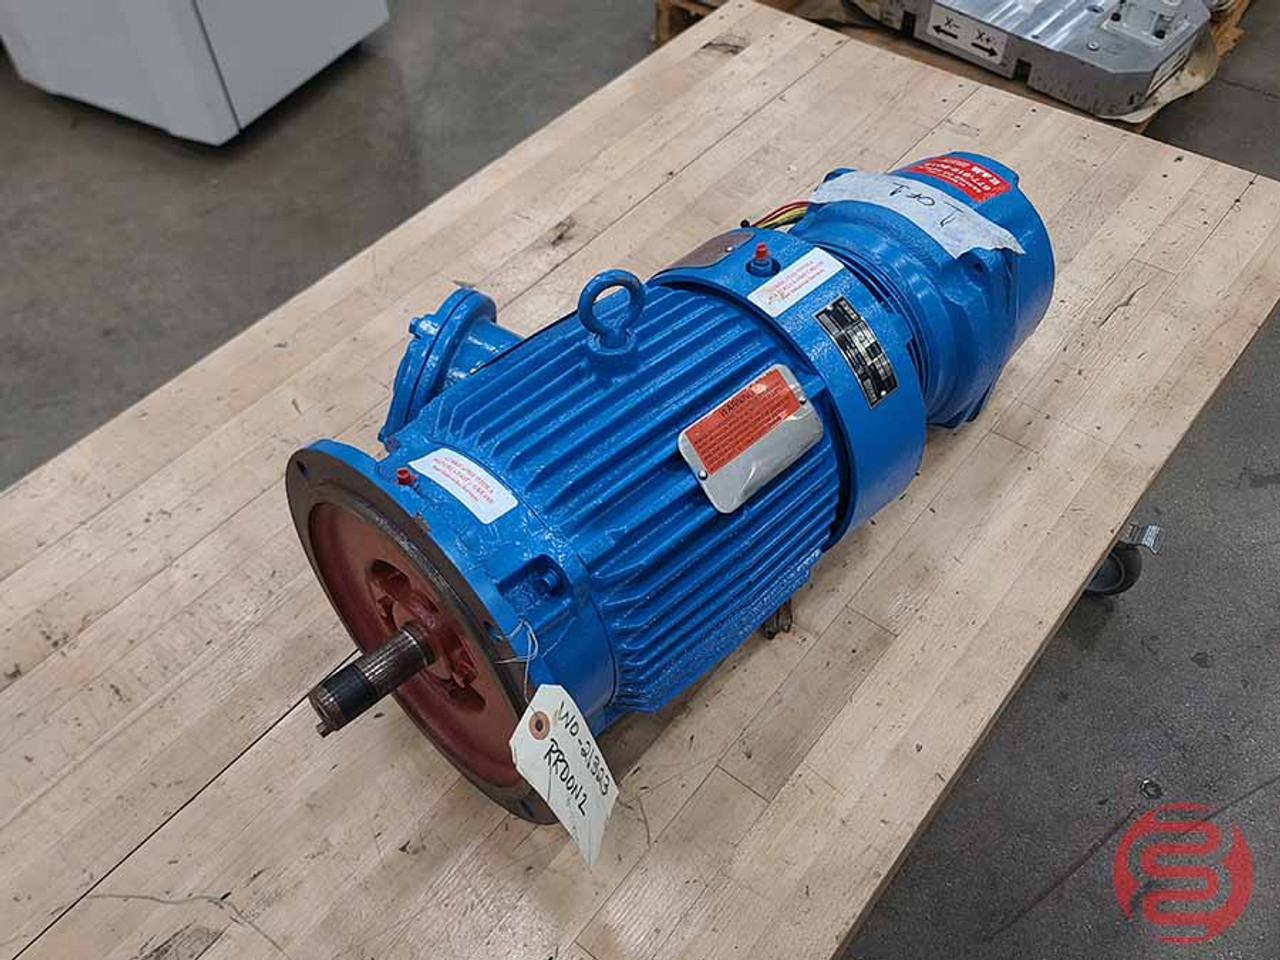 Reliance Electric Duty Master 2HP 460V 1160RPM 2.8A Motor L 184TD Frame